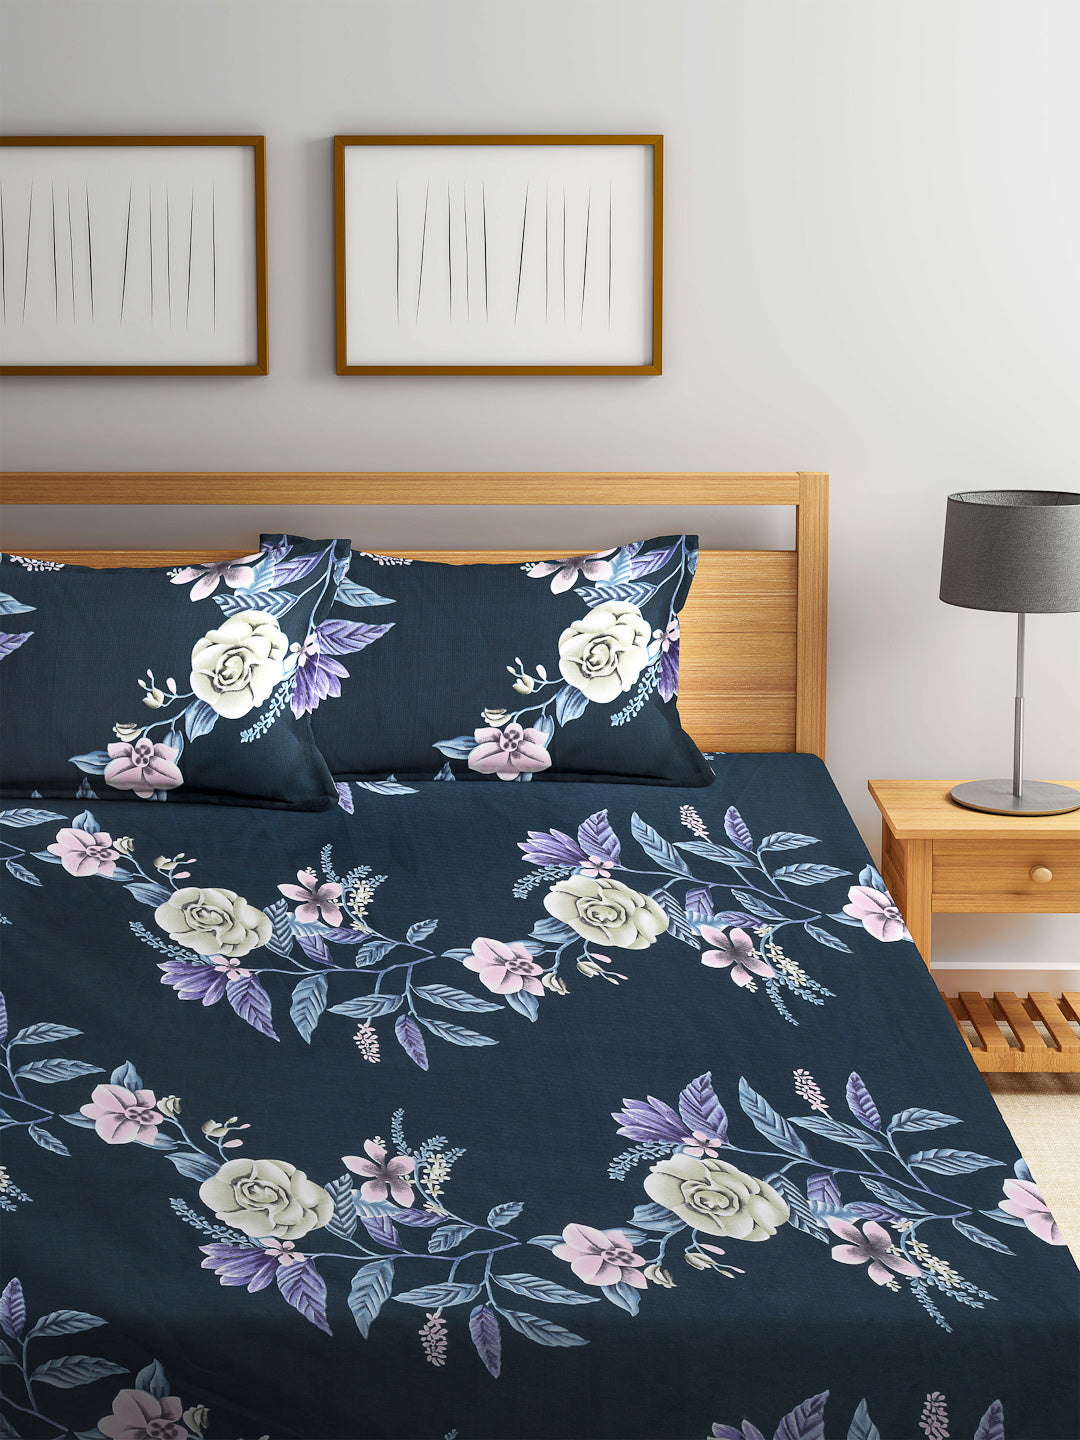 Arrabi Blue Floral TC Cotton Blend Double Size Fitted Bedsheet with 2 Pillow Cover ( 250 x 225 cm)